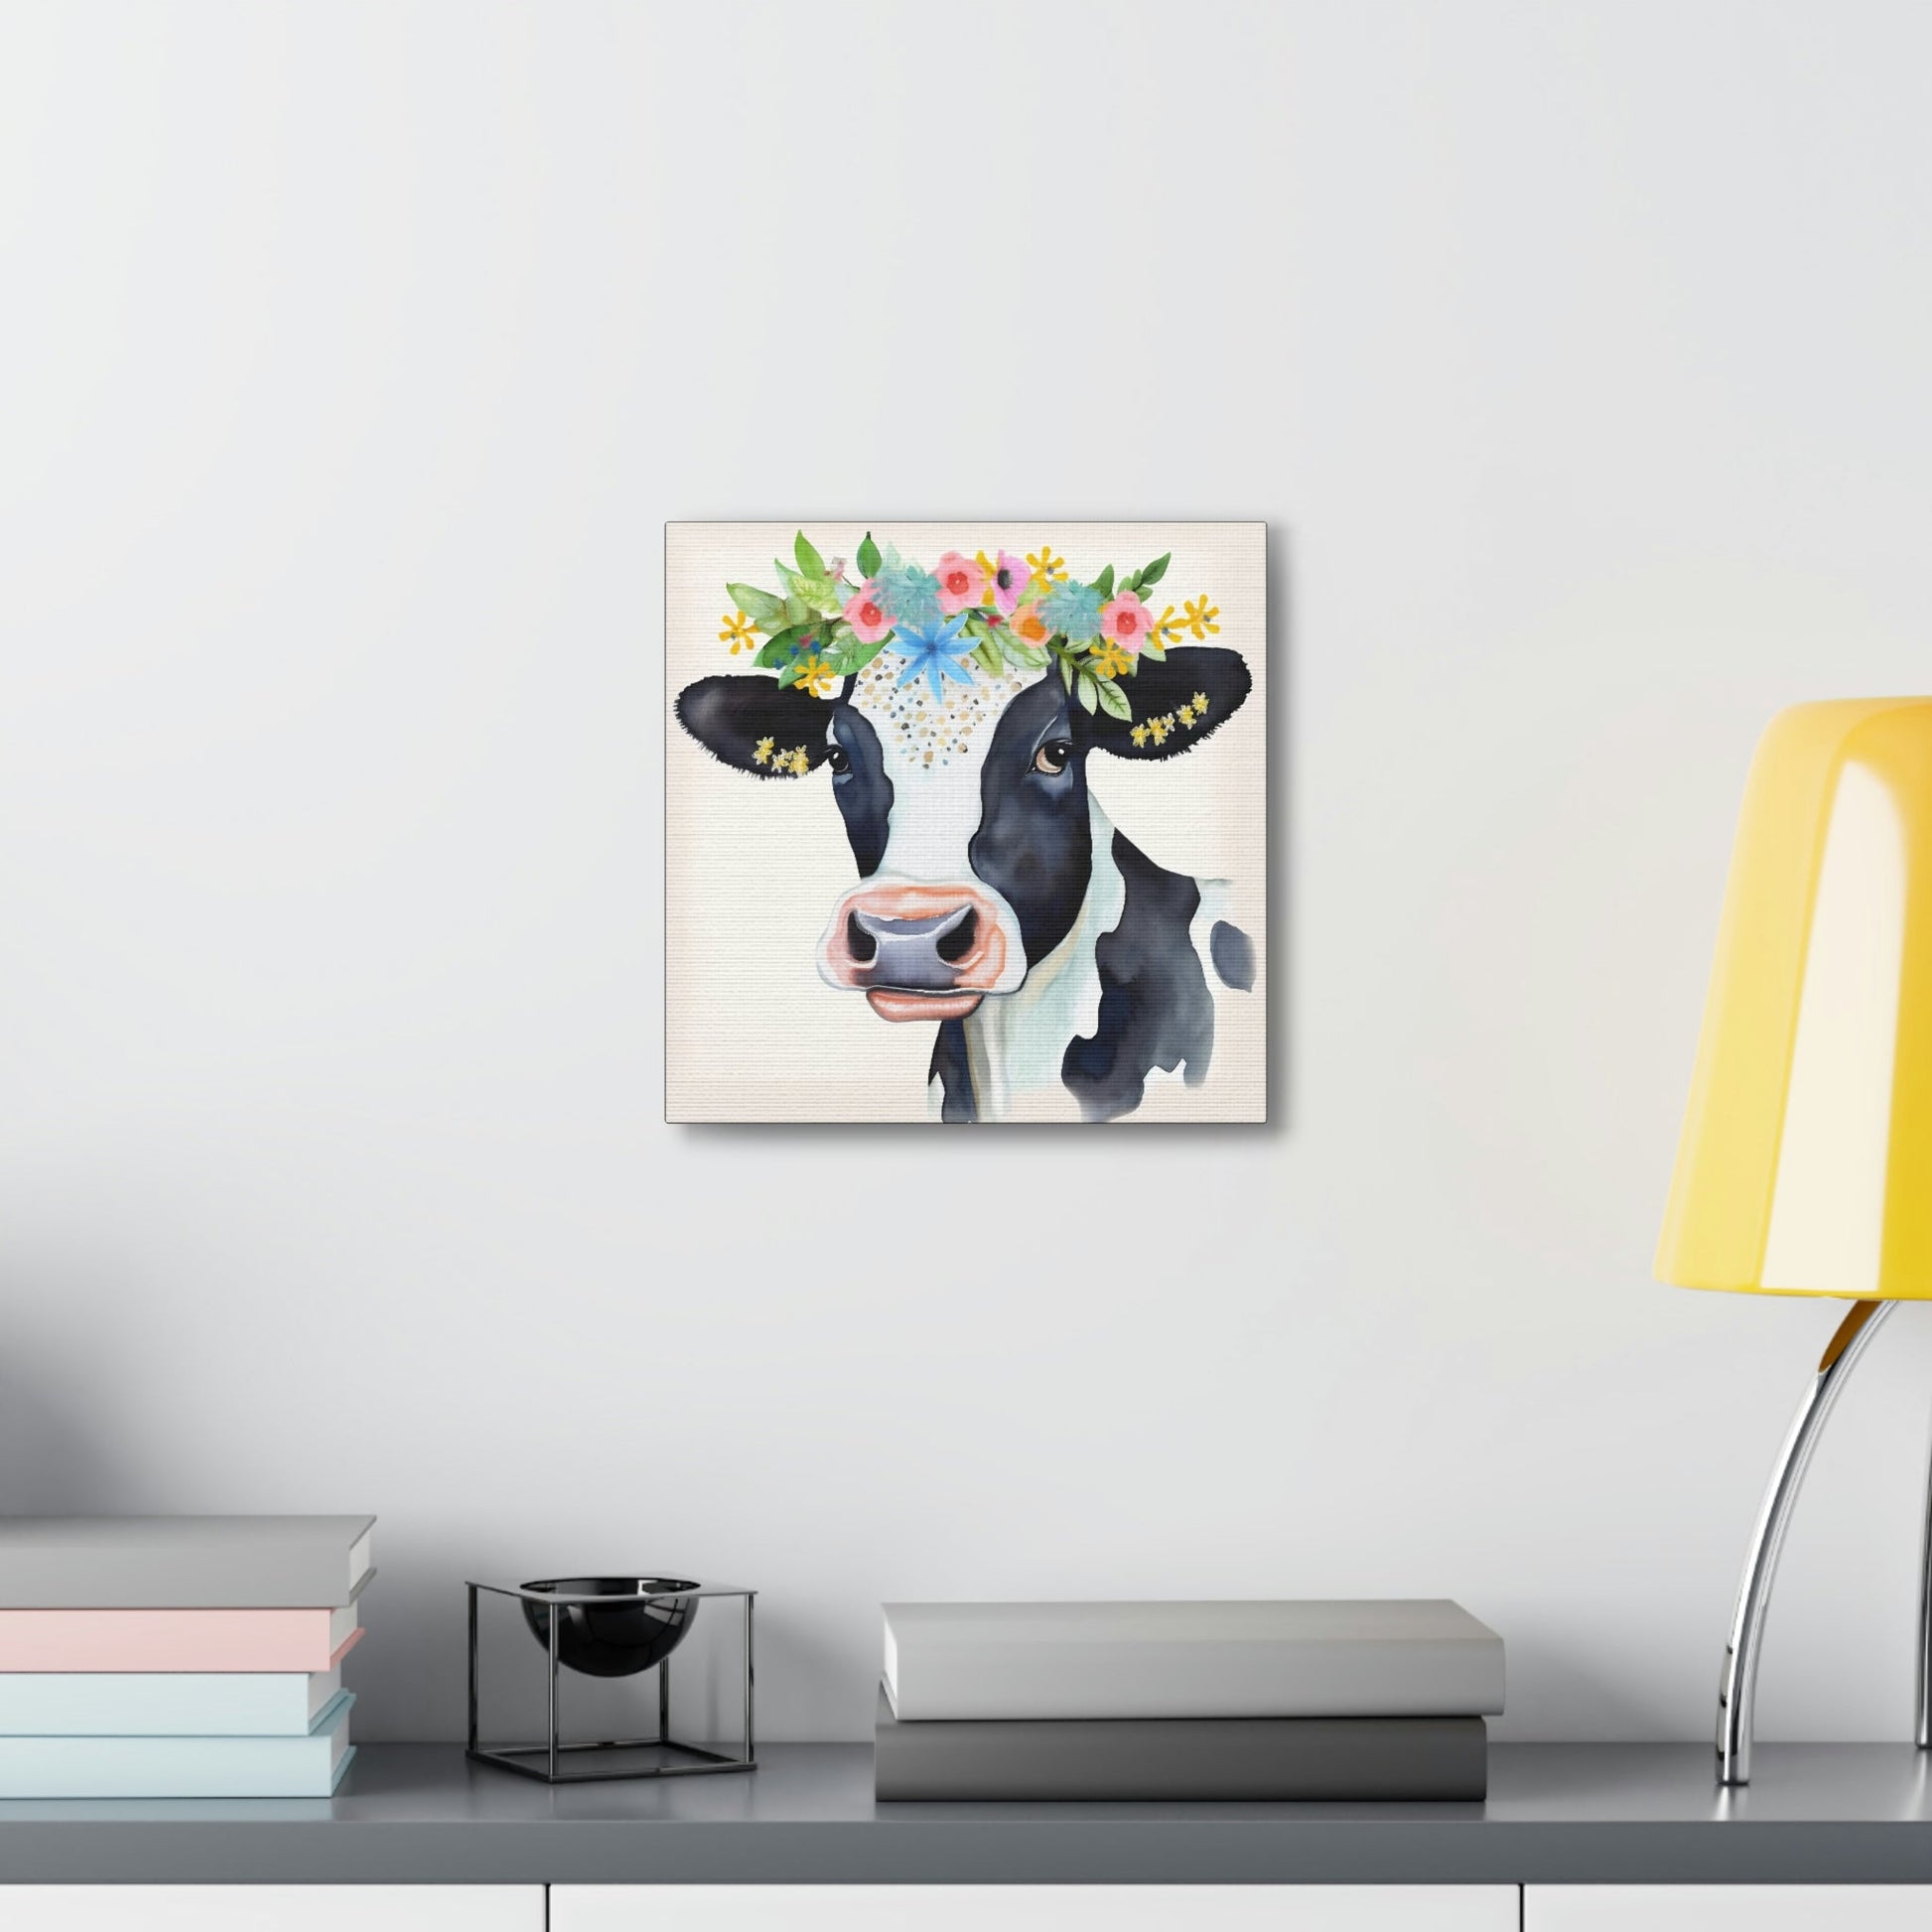 Rustic Folk Art Holstein Cow Portrait Canvas Gallery Wraps - Perfect Gift for Your Country Farm Friends